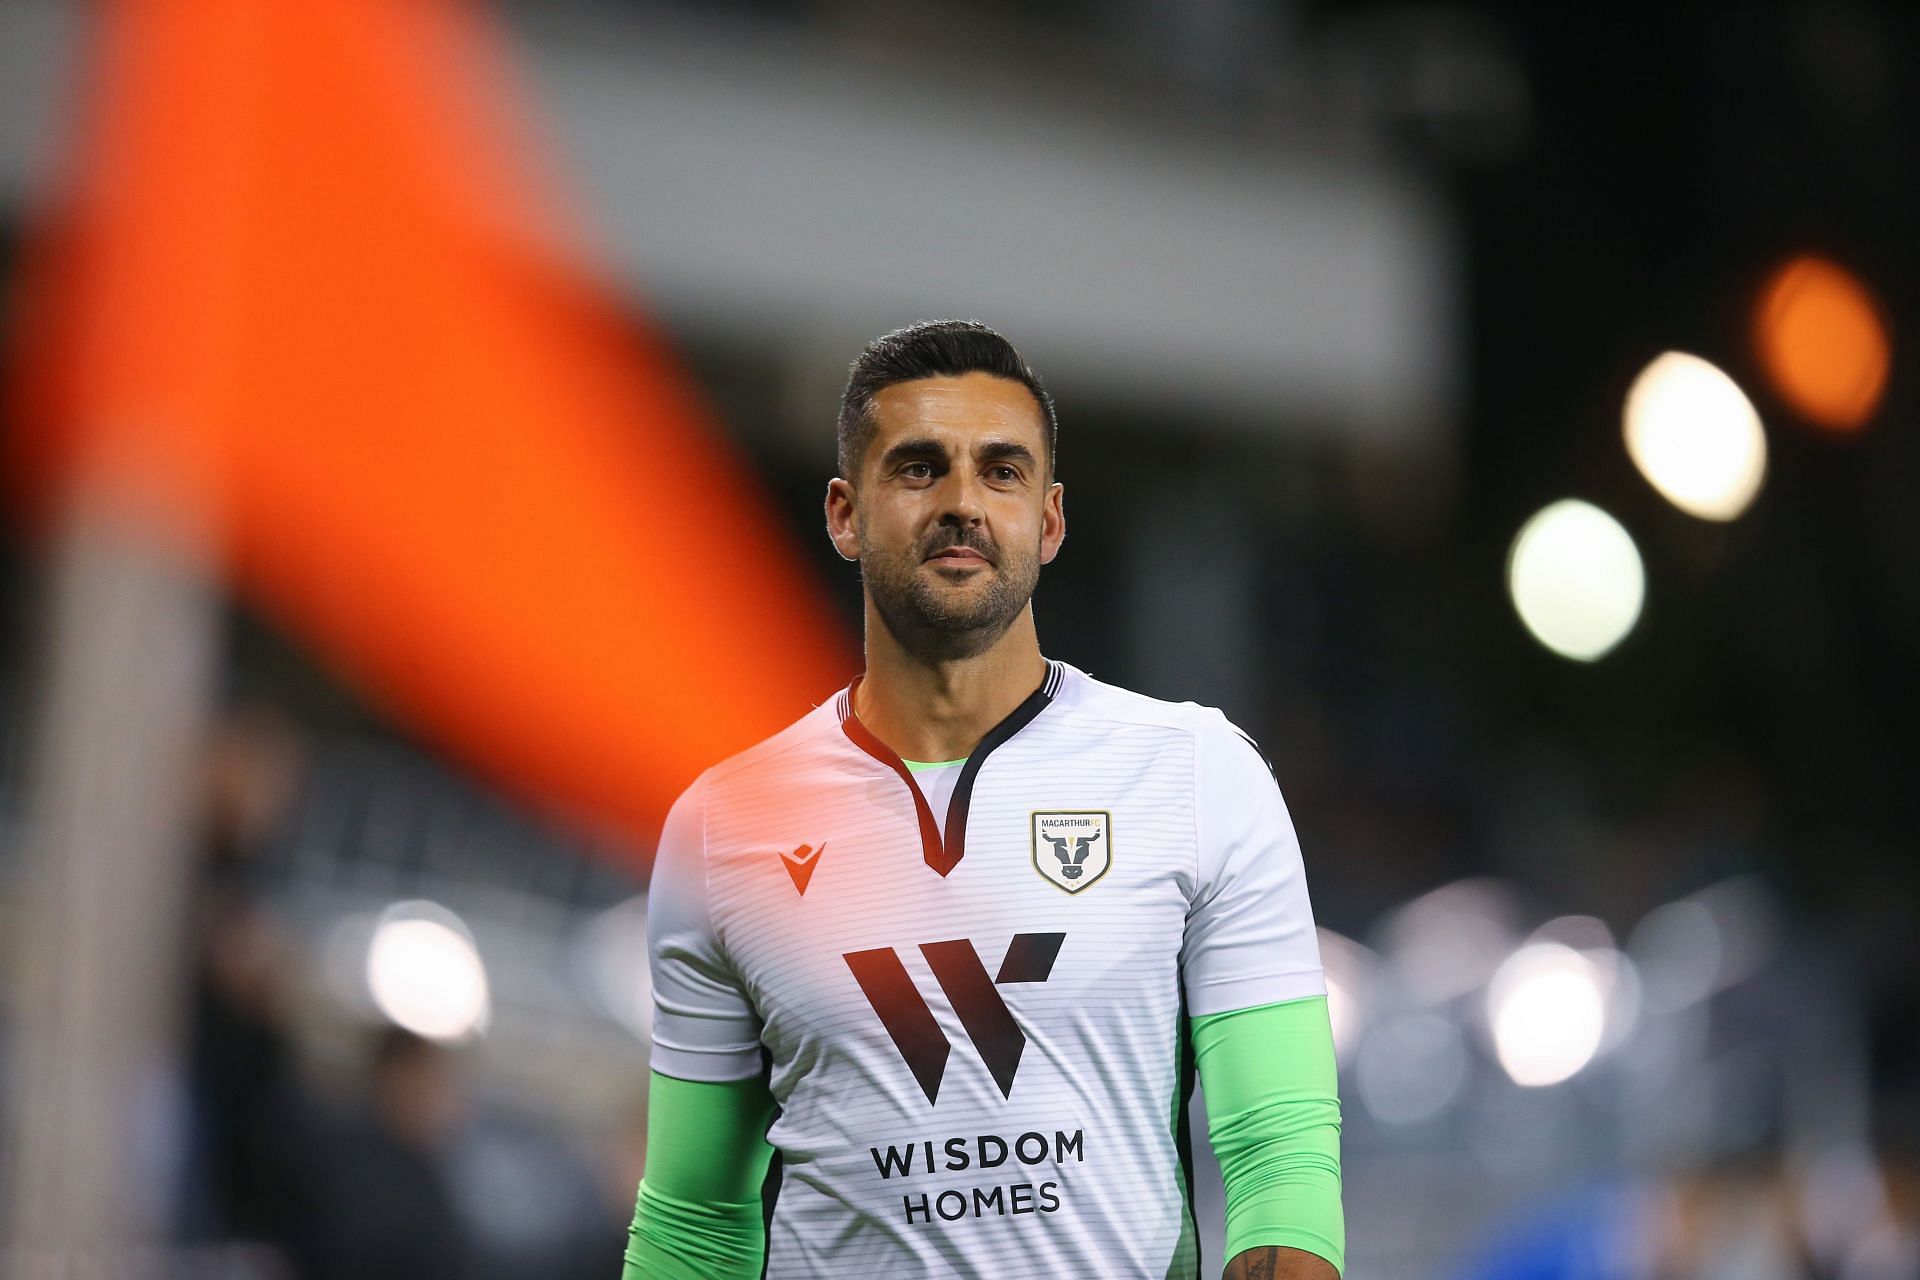 Federici has been forced into retirement